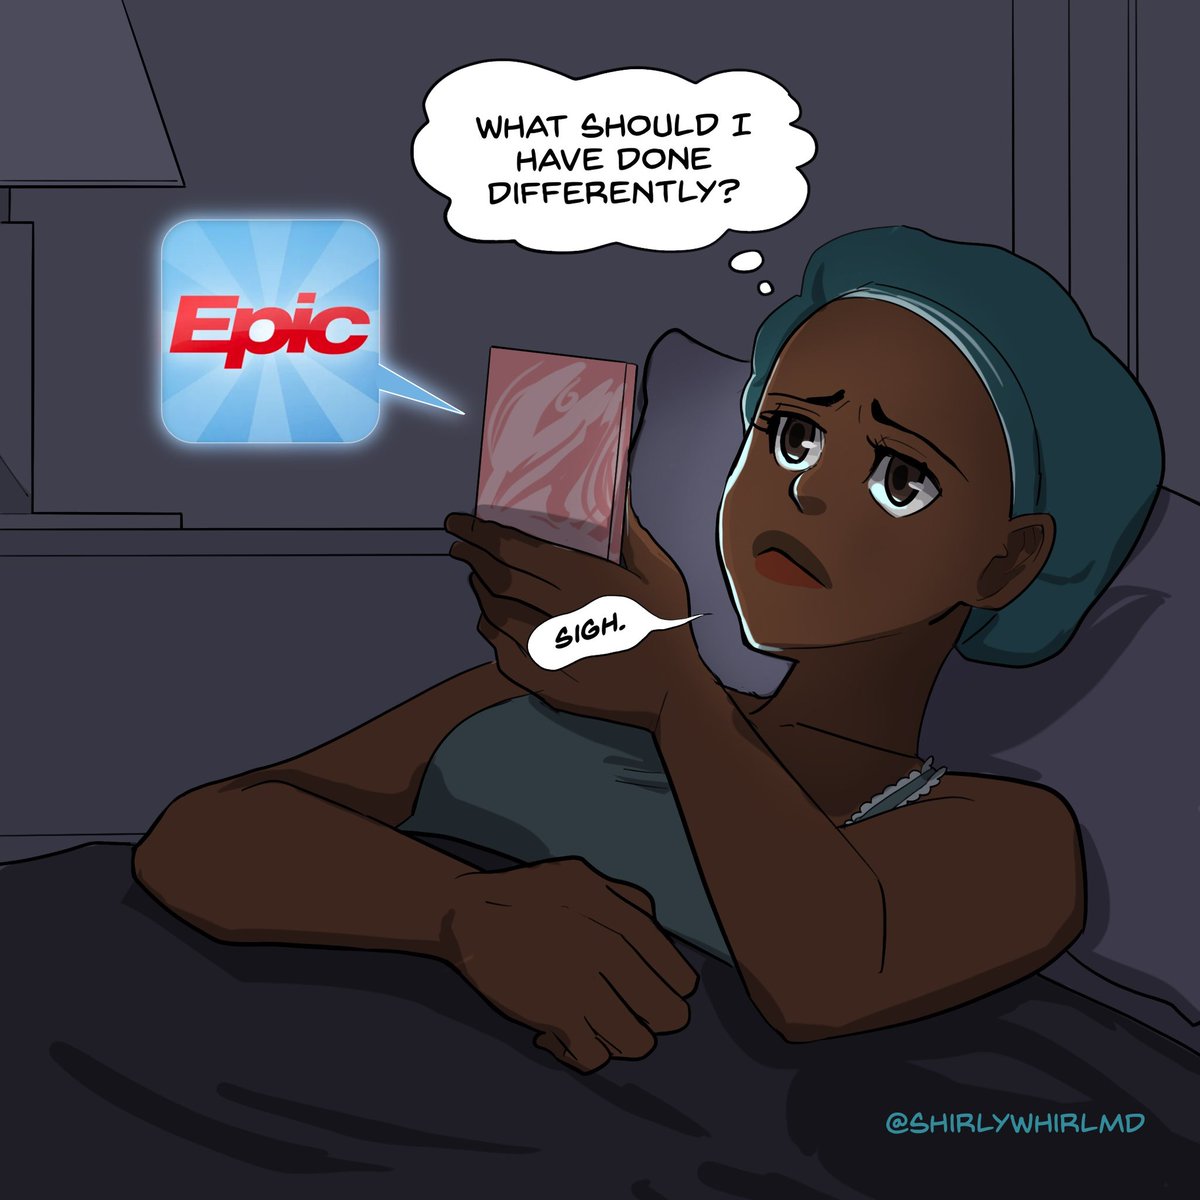 I don’t post my comics on Twitter much anymore bc I prefer Instagram, but really want #proceduralists #surgerytwitter #ic #medtwitter #cardtwitter’s thoughts - how do y’all deal with these feelings?